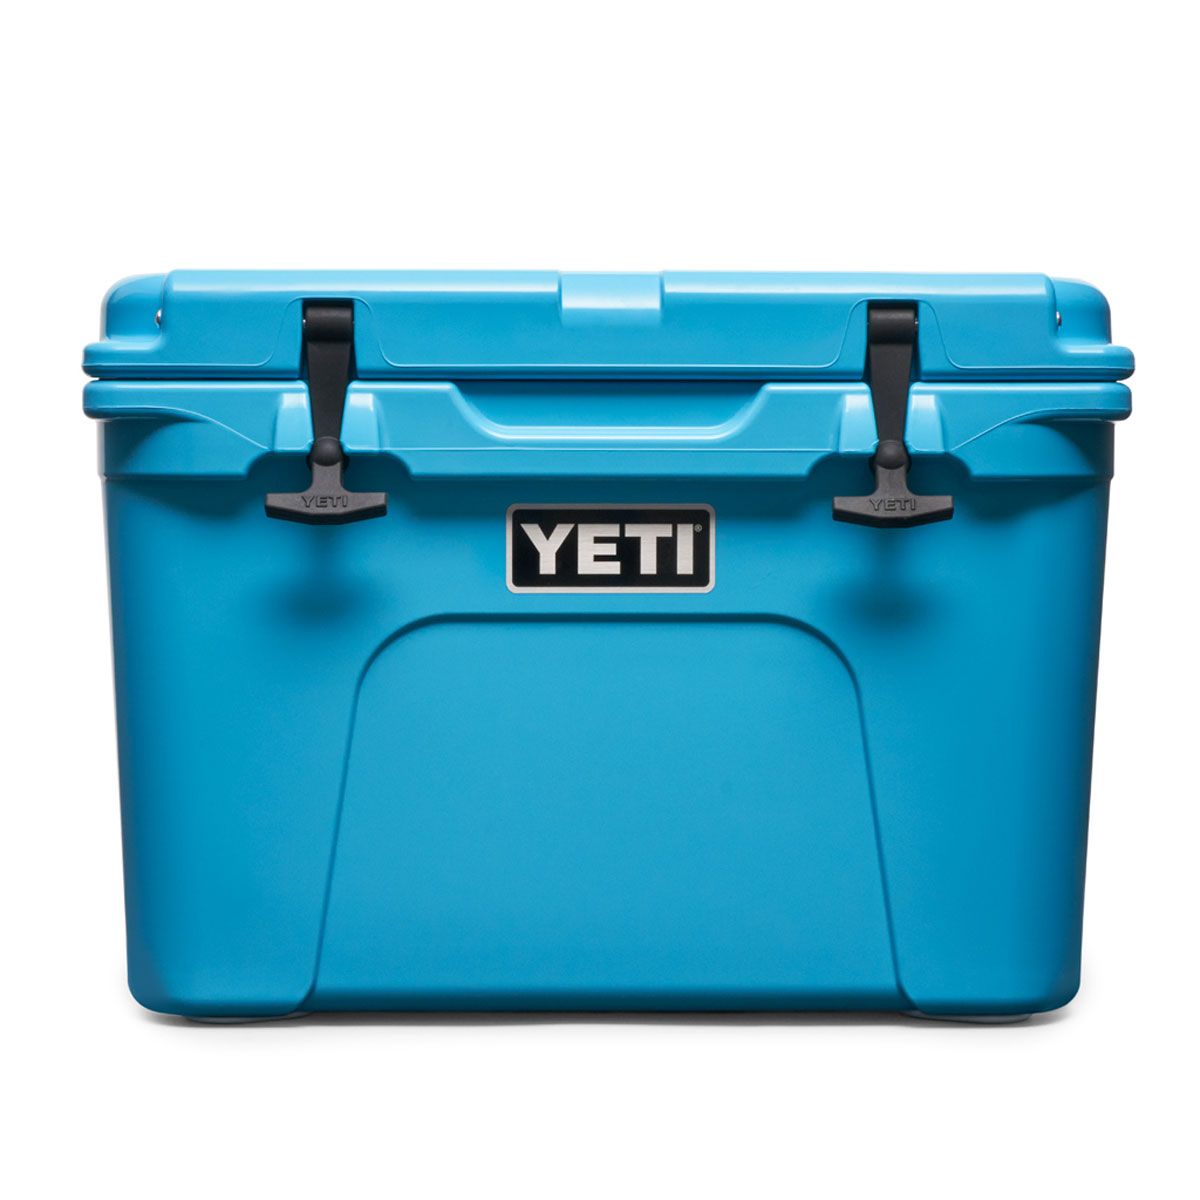 Yeti Coolers Tundra 35 Cooler Limited Edition Reef Blue - AustinKayak